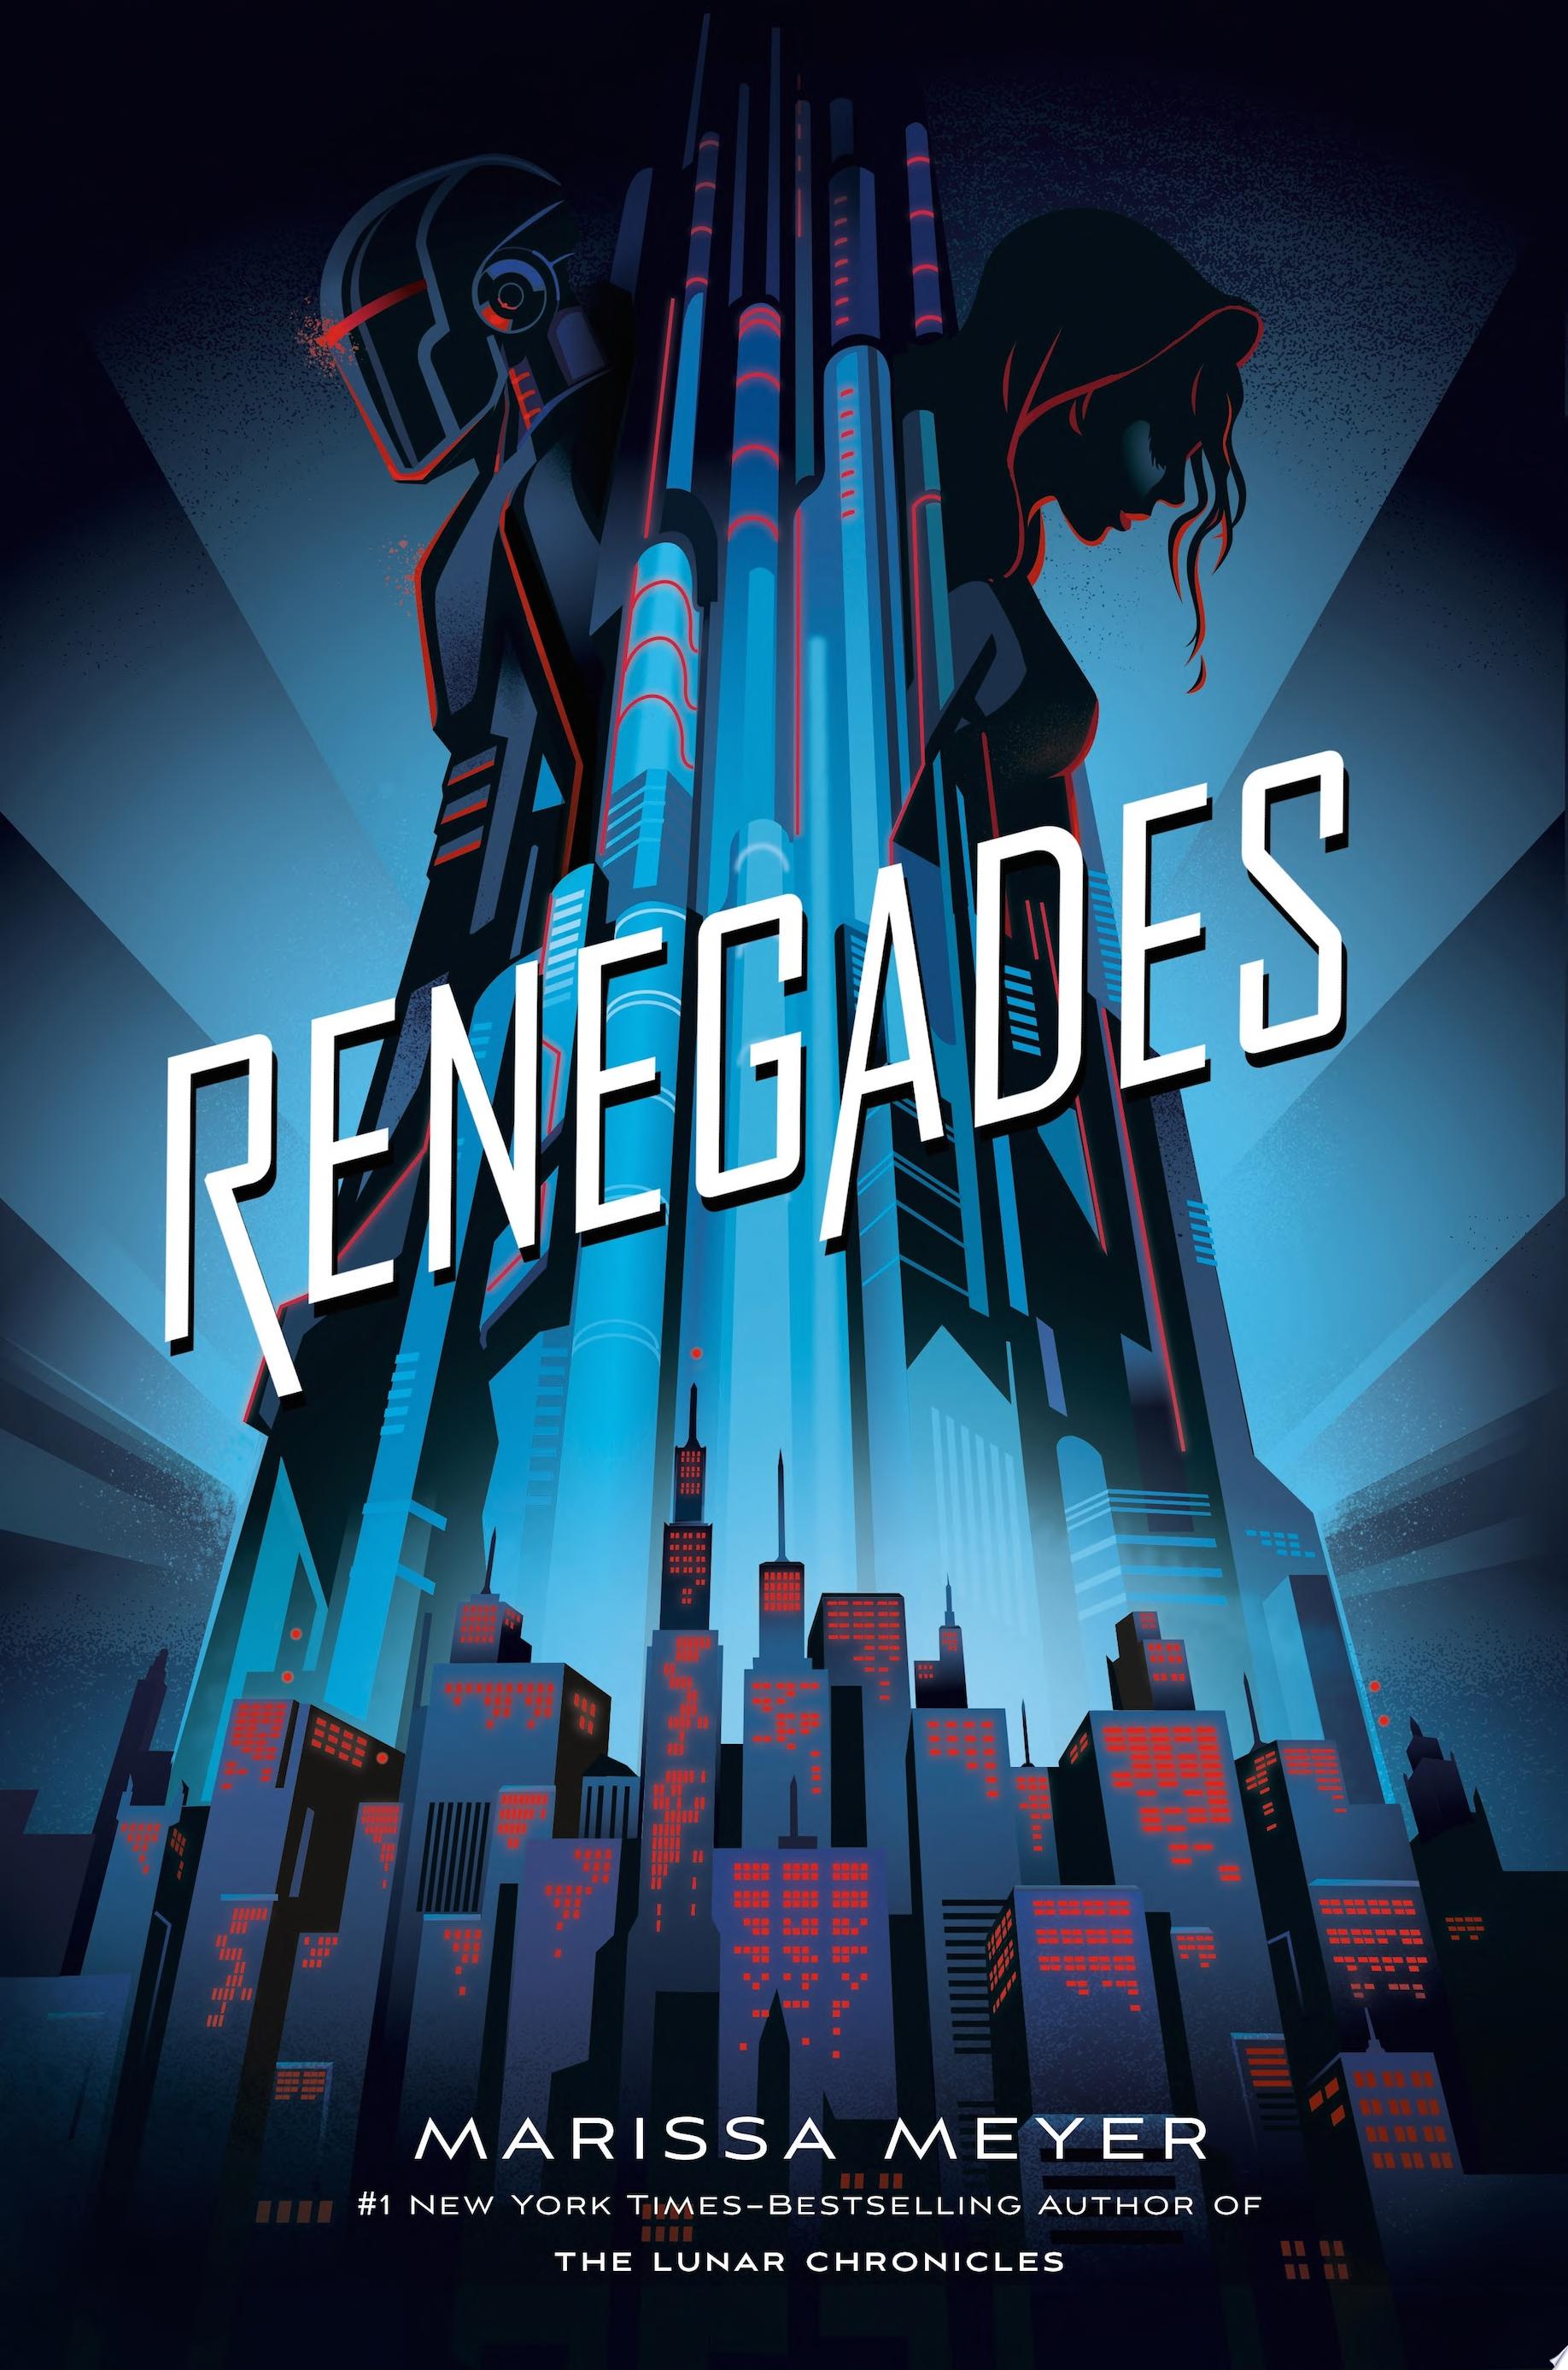 Image for "Renegades"